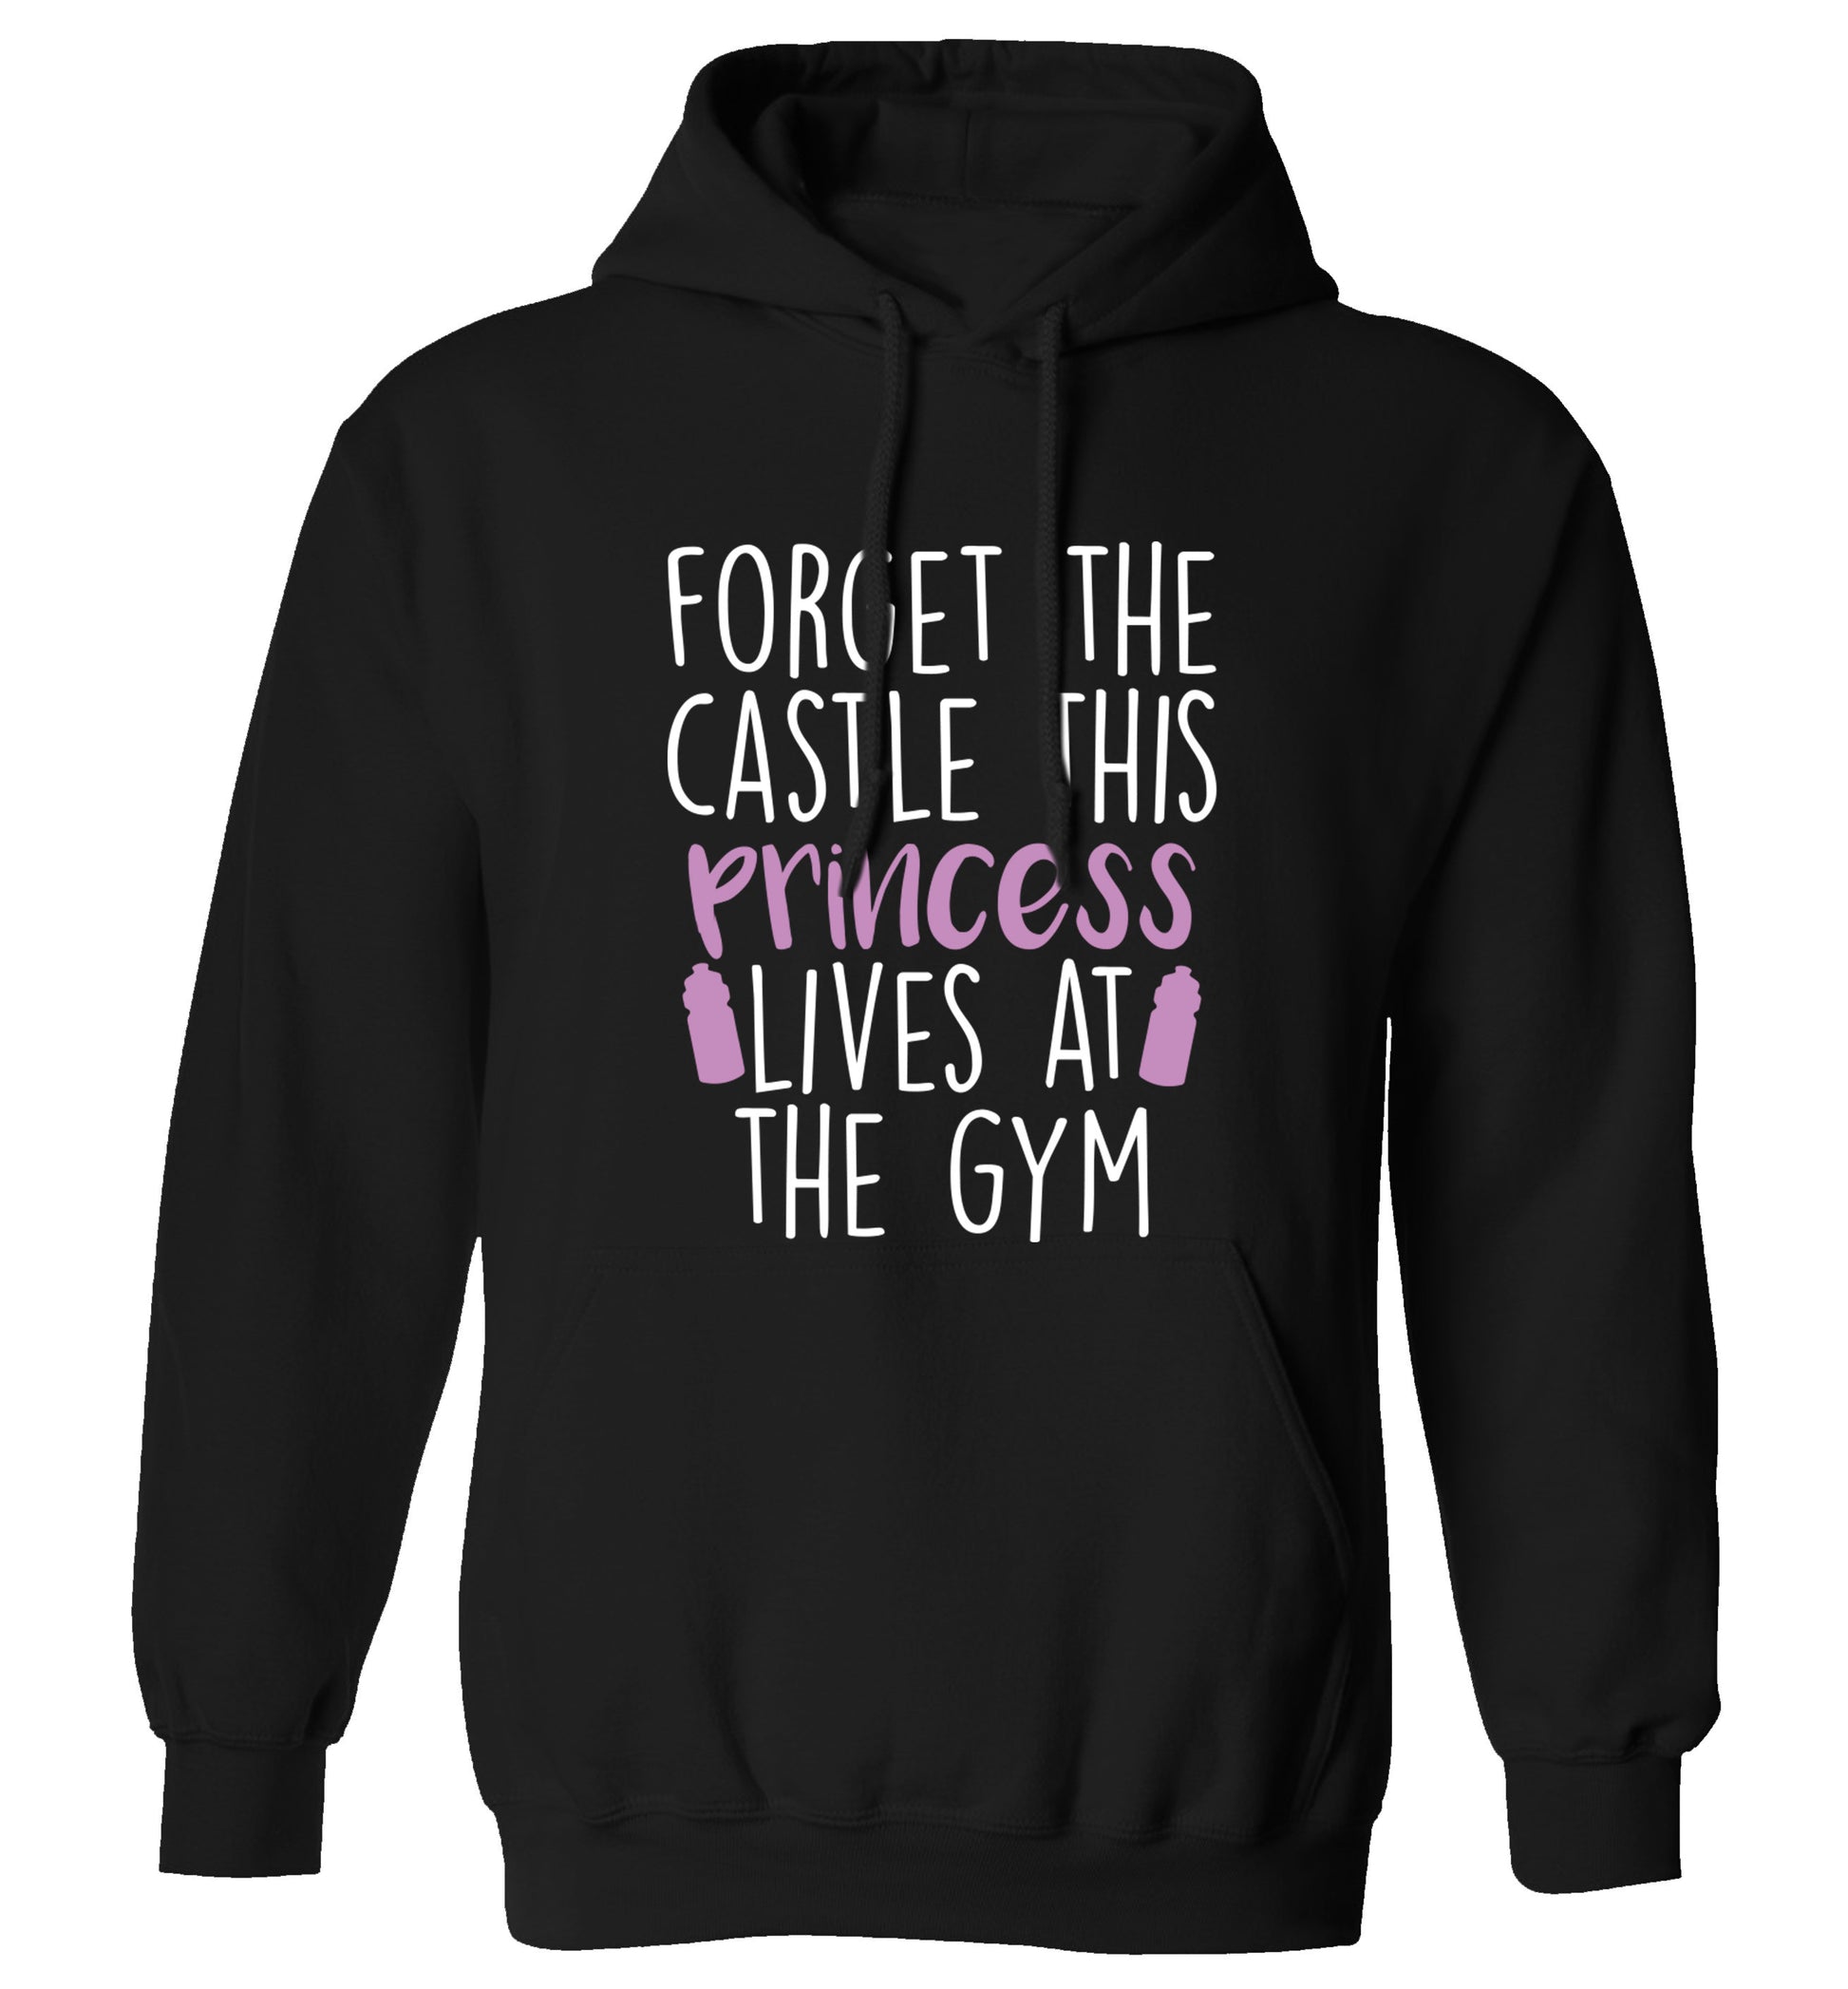 Forget the castle this princess lives at the gym adults unisex black hoodie 2XL